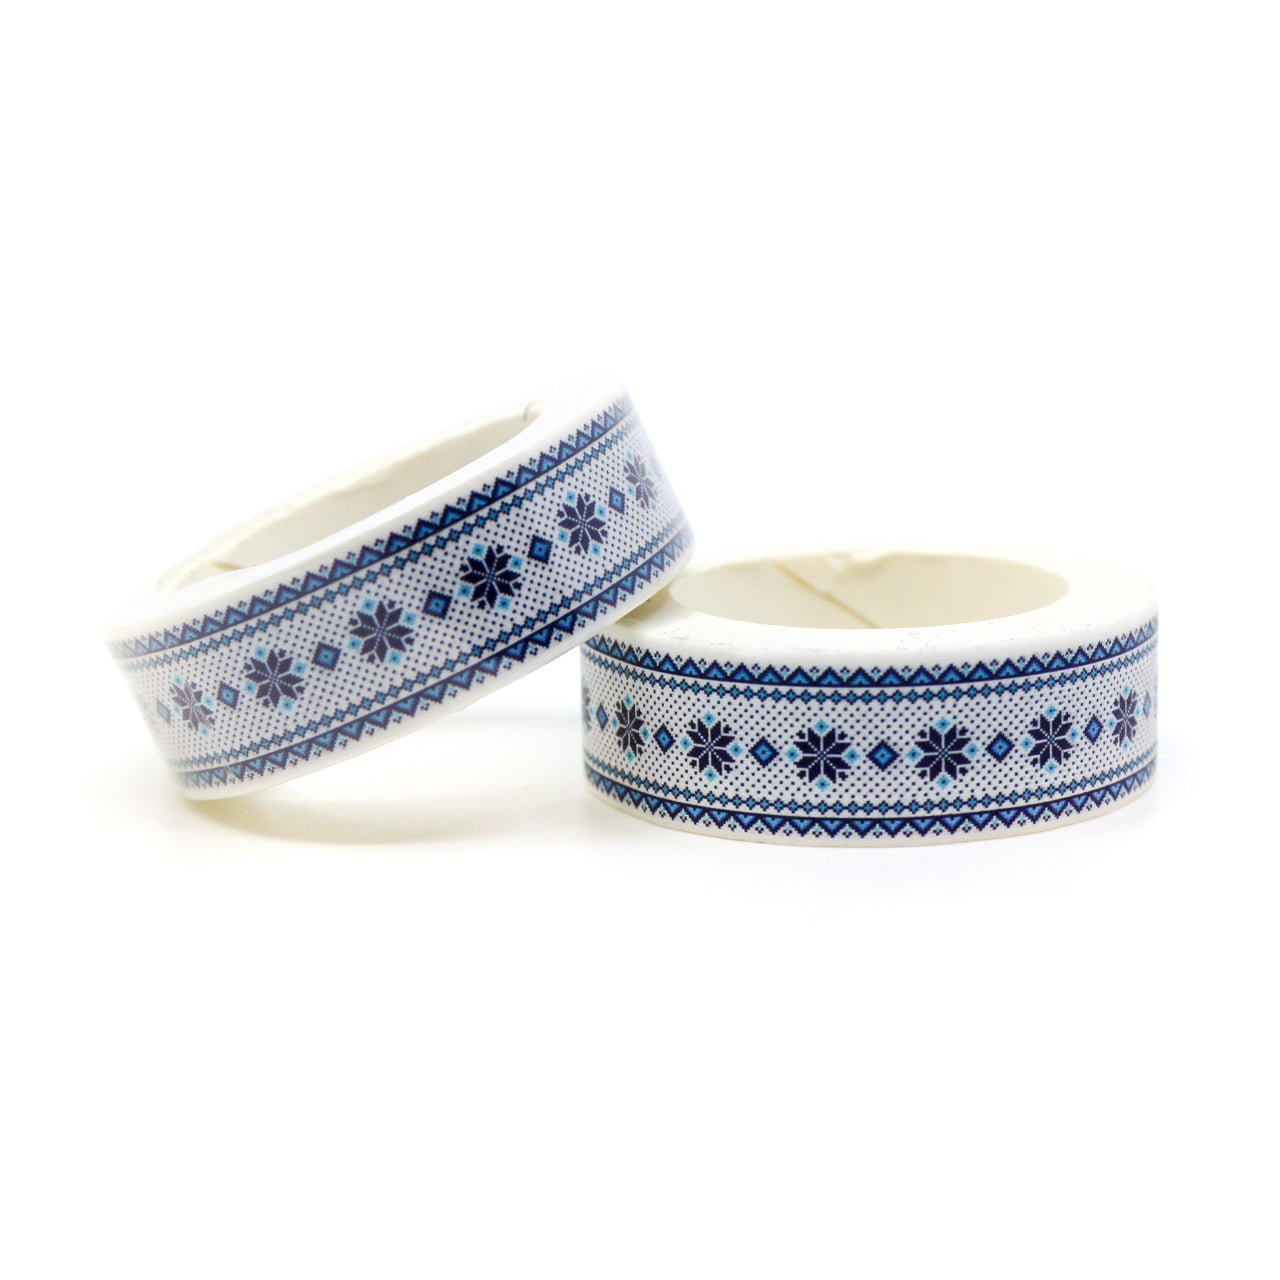 This cute blue washi tape is perfect for sweater weather. The blue and white winter cross stitch pattern will bring joy to any craft project, BUJO or planner spread. This tape is sold at BBB Supplies Craft Shop.